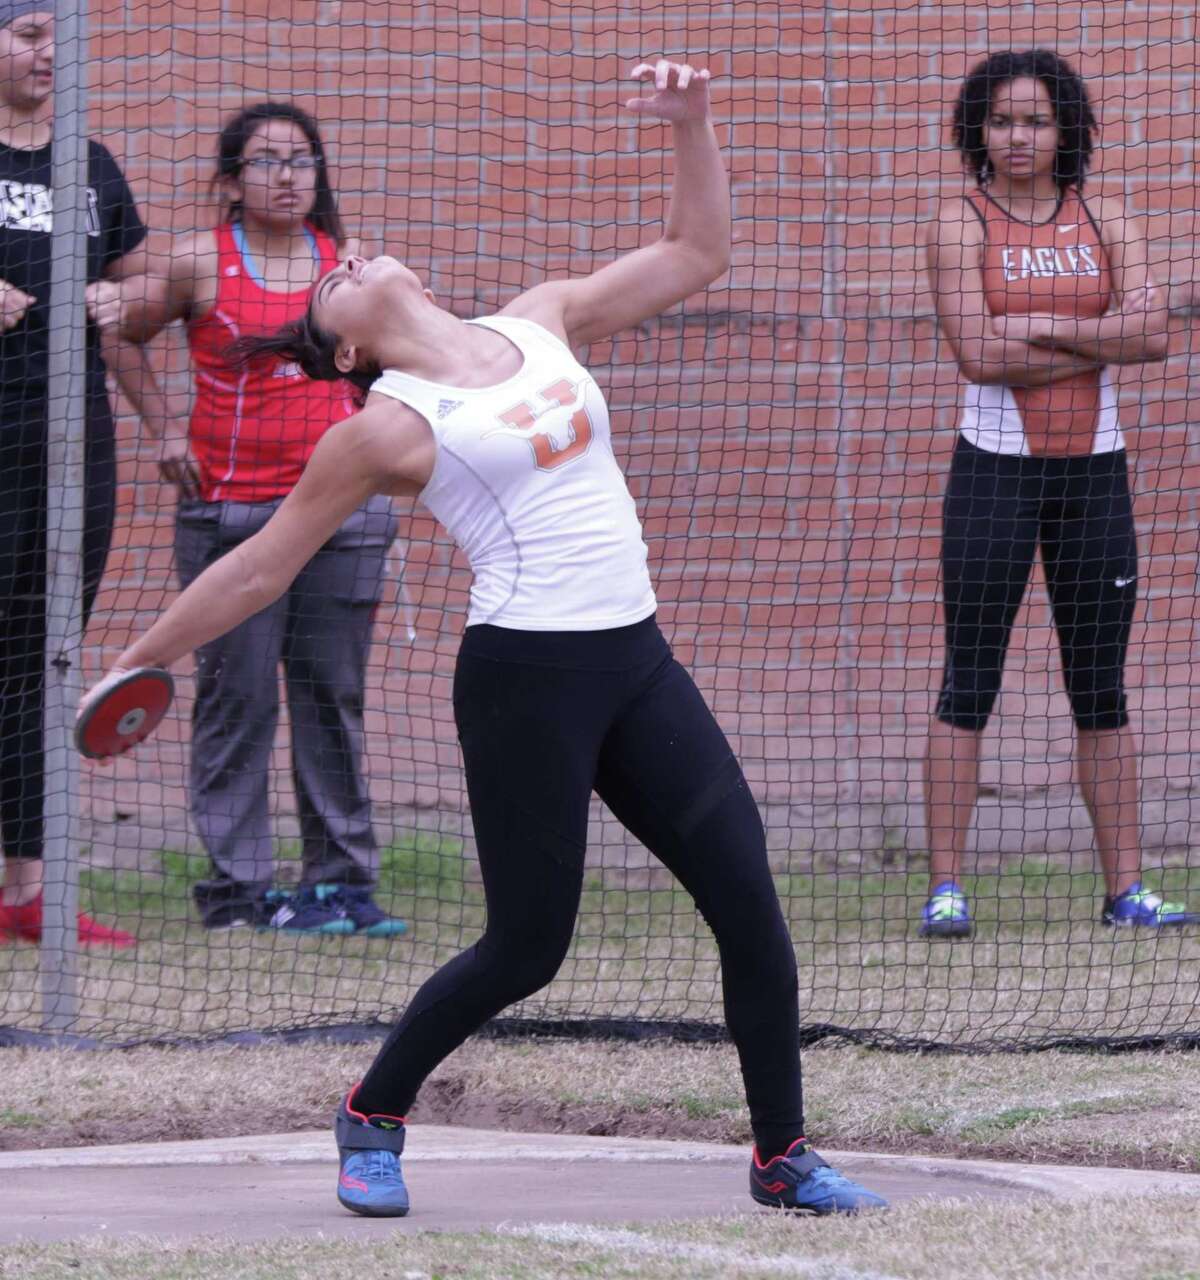 United’s Sadey Rodriguez broke her city record three times at the Eagle Pass Invitational Relays and set the top mark in the nation for this year with a throw of 159’4 in the discus.